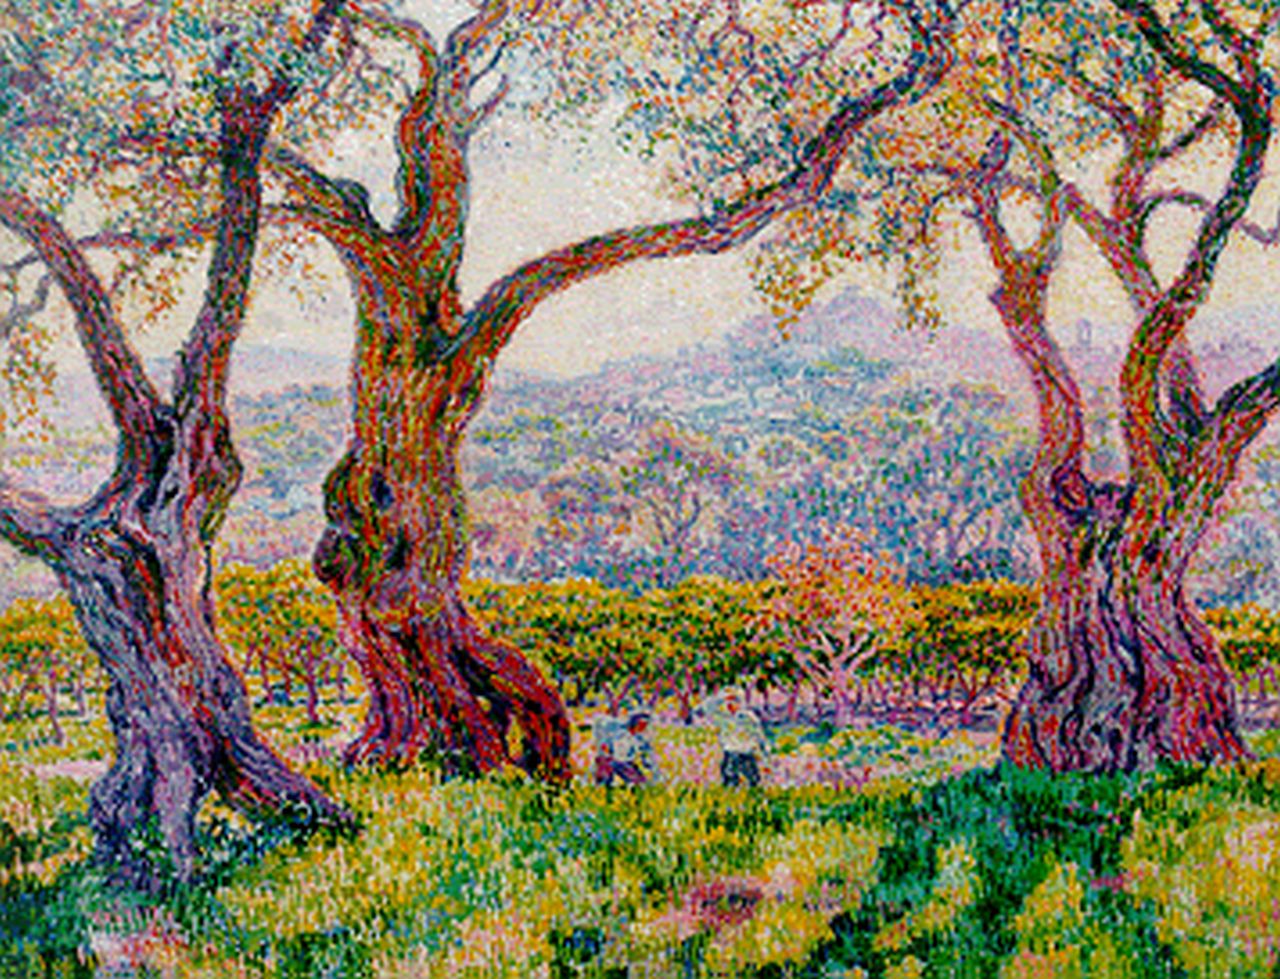 Rysselberghe Th. van | Théodore 'Théo' van Rysselberghe, Oliviers à Cagnes, oil on canvas 89.9 x 116.7 cm, signed l.l. with monogram and painted circa 1905